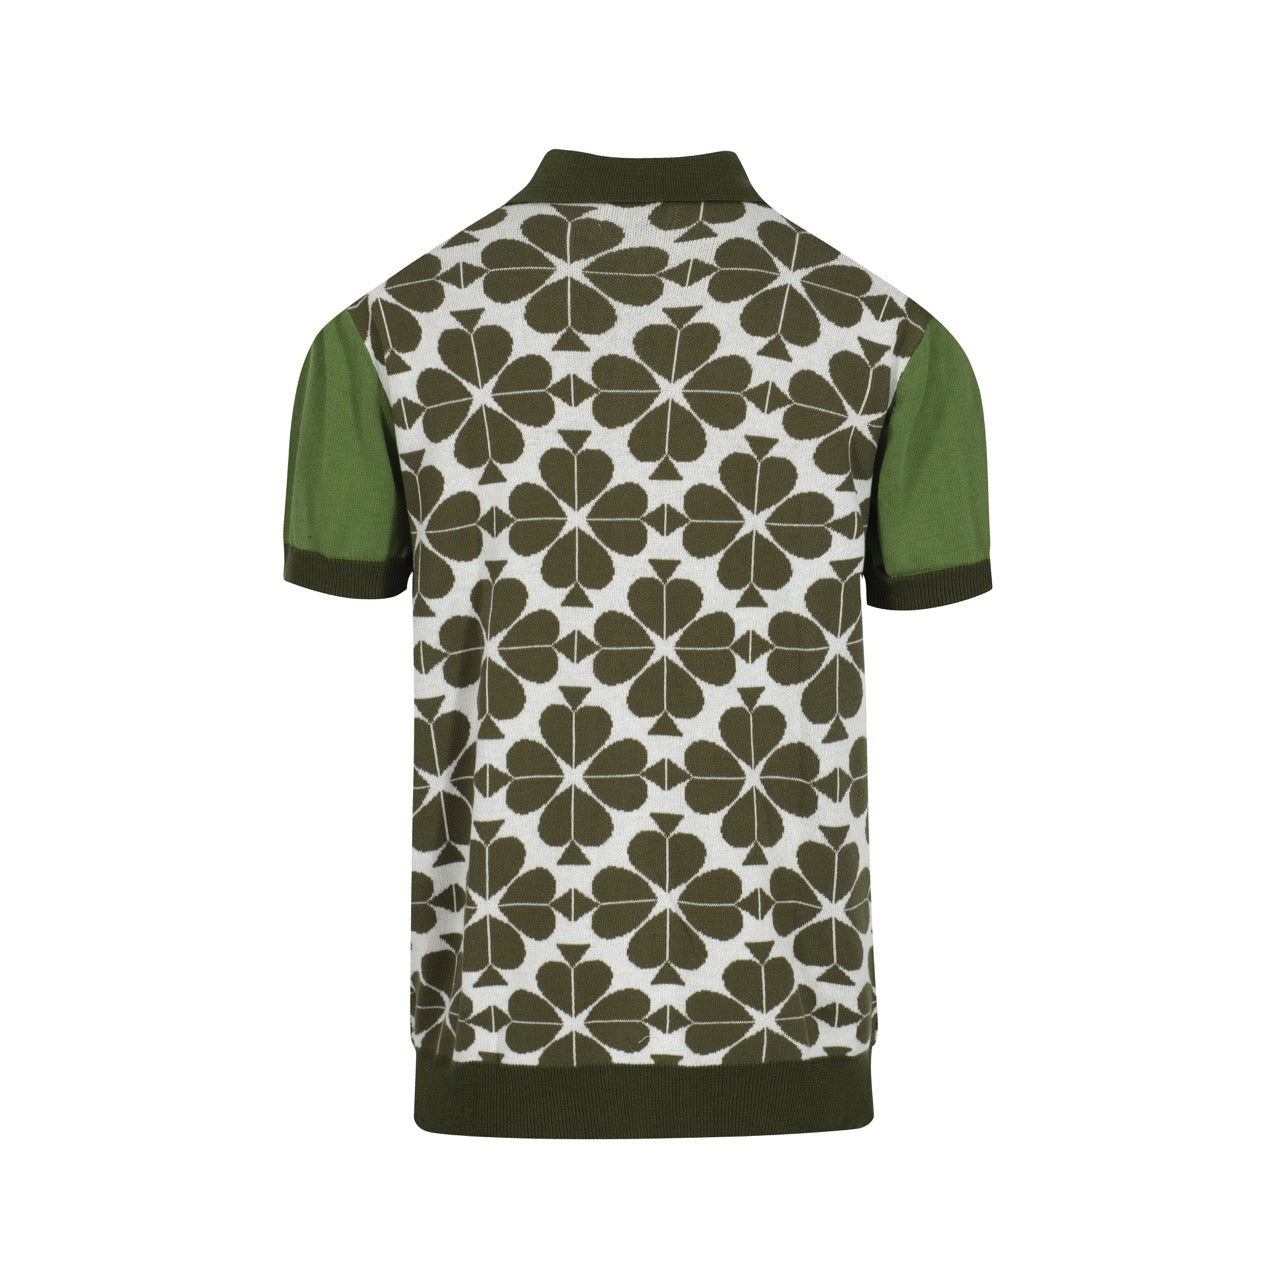 Men's Playing Card Design Knitted Green Short Sleeve Polo Shirt